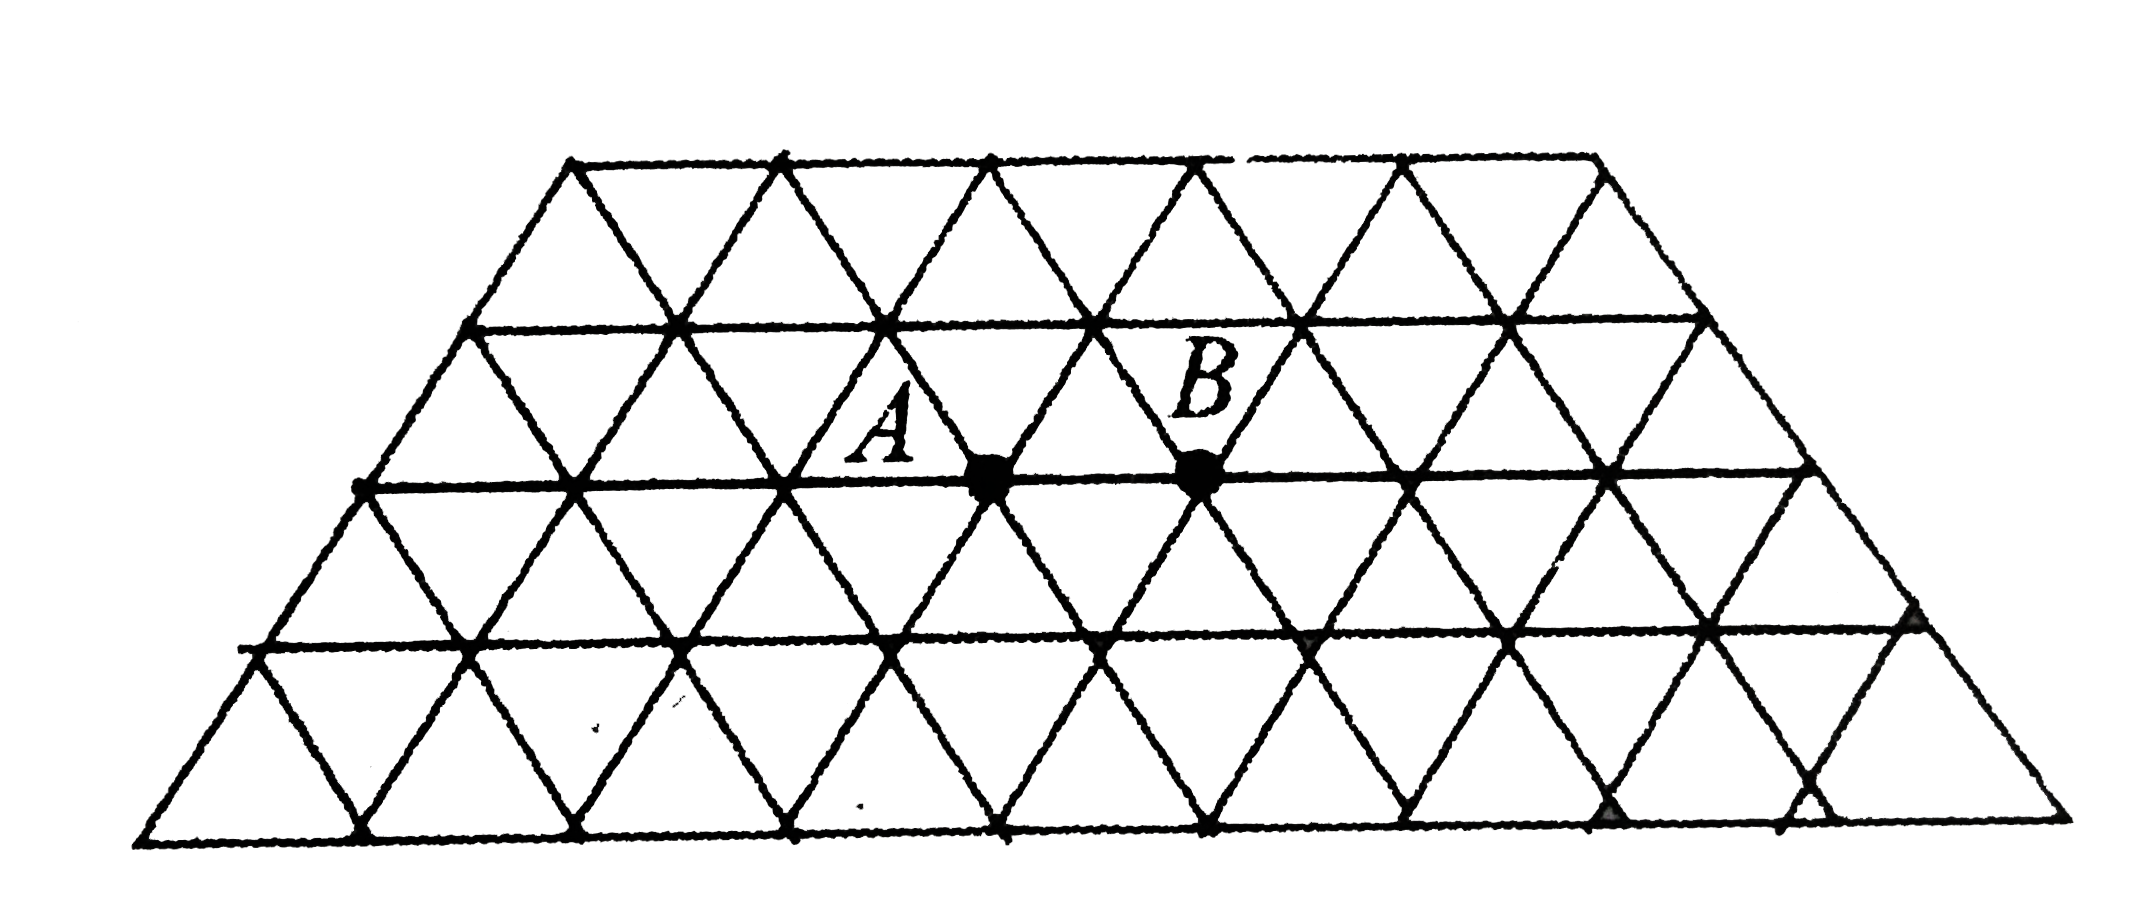 There is an infinite wire grid with cells in the form of equilateral triangles. The resistance of each wire between neighboring joint connections is R0 The net resistance of the whole grid between the points A and B as shown in fig.